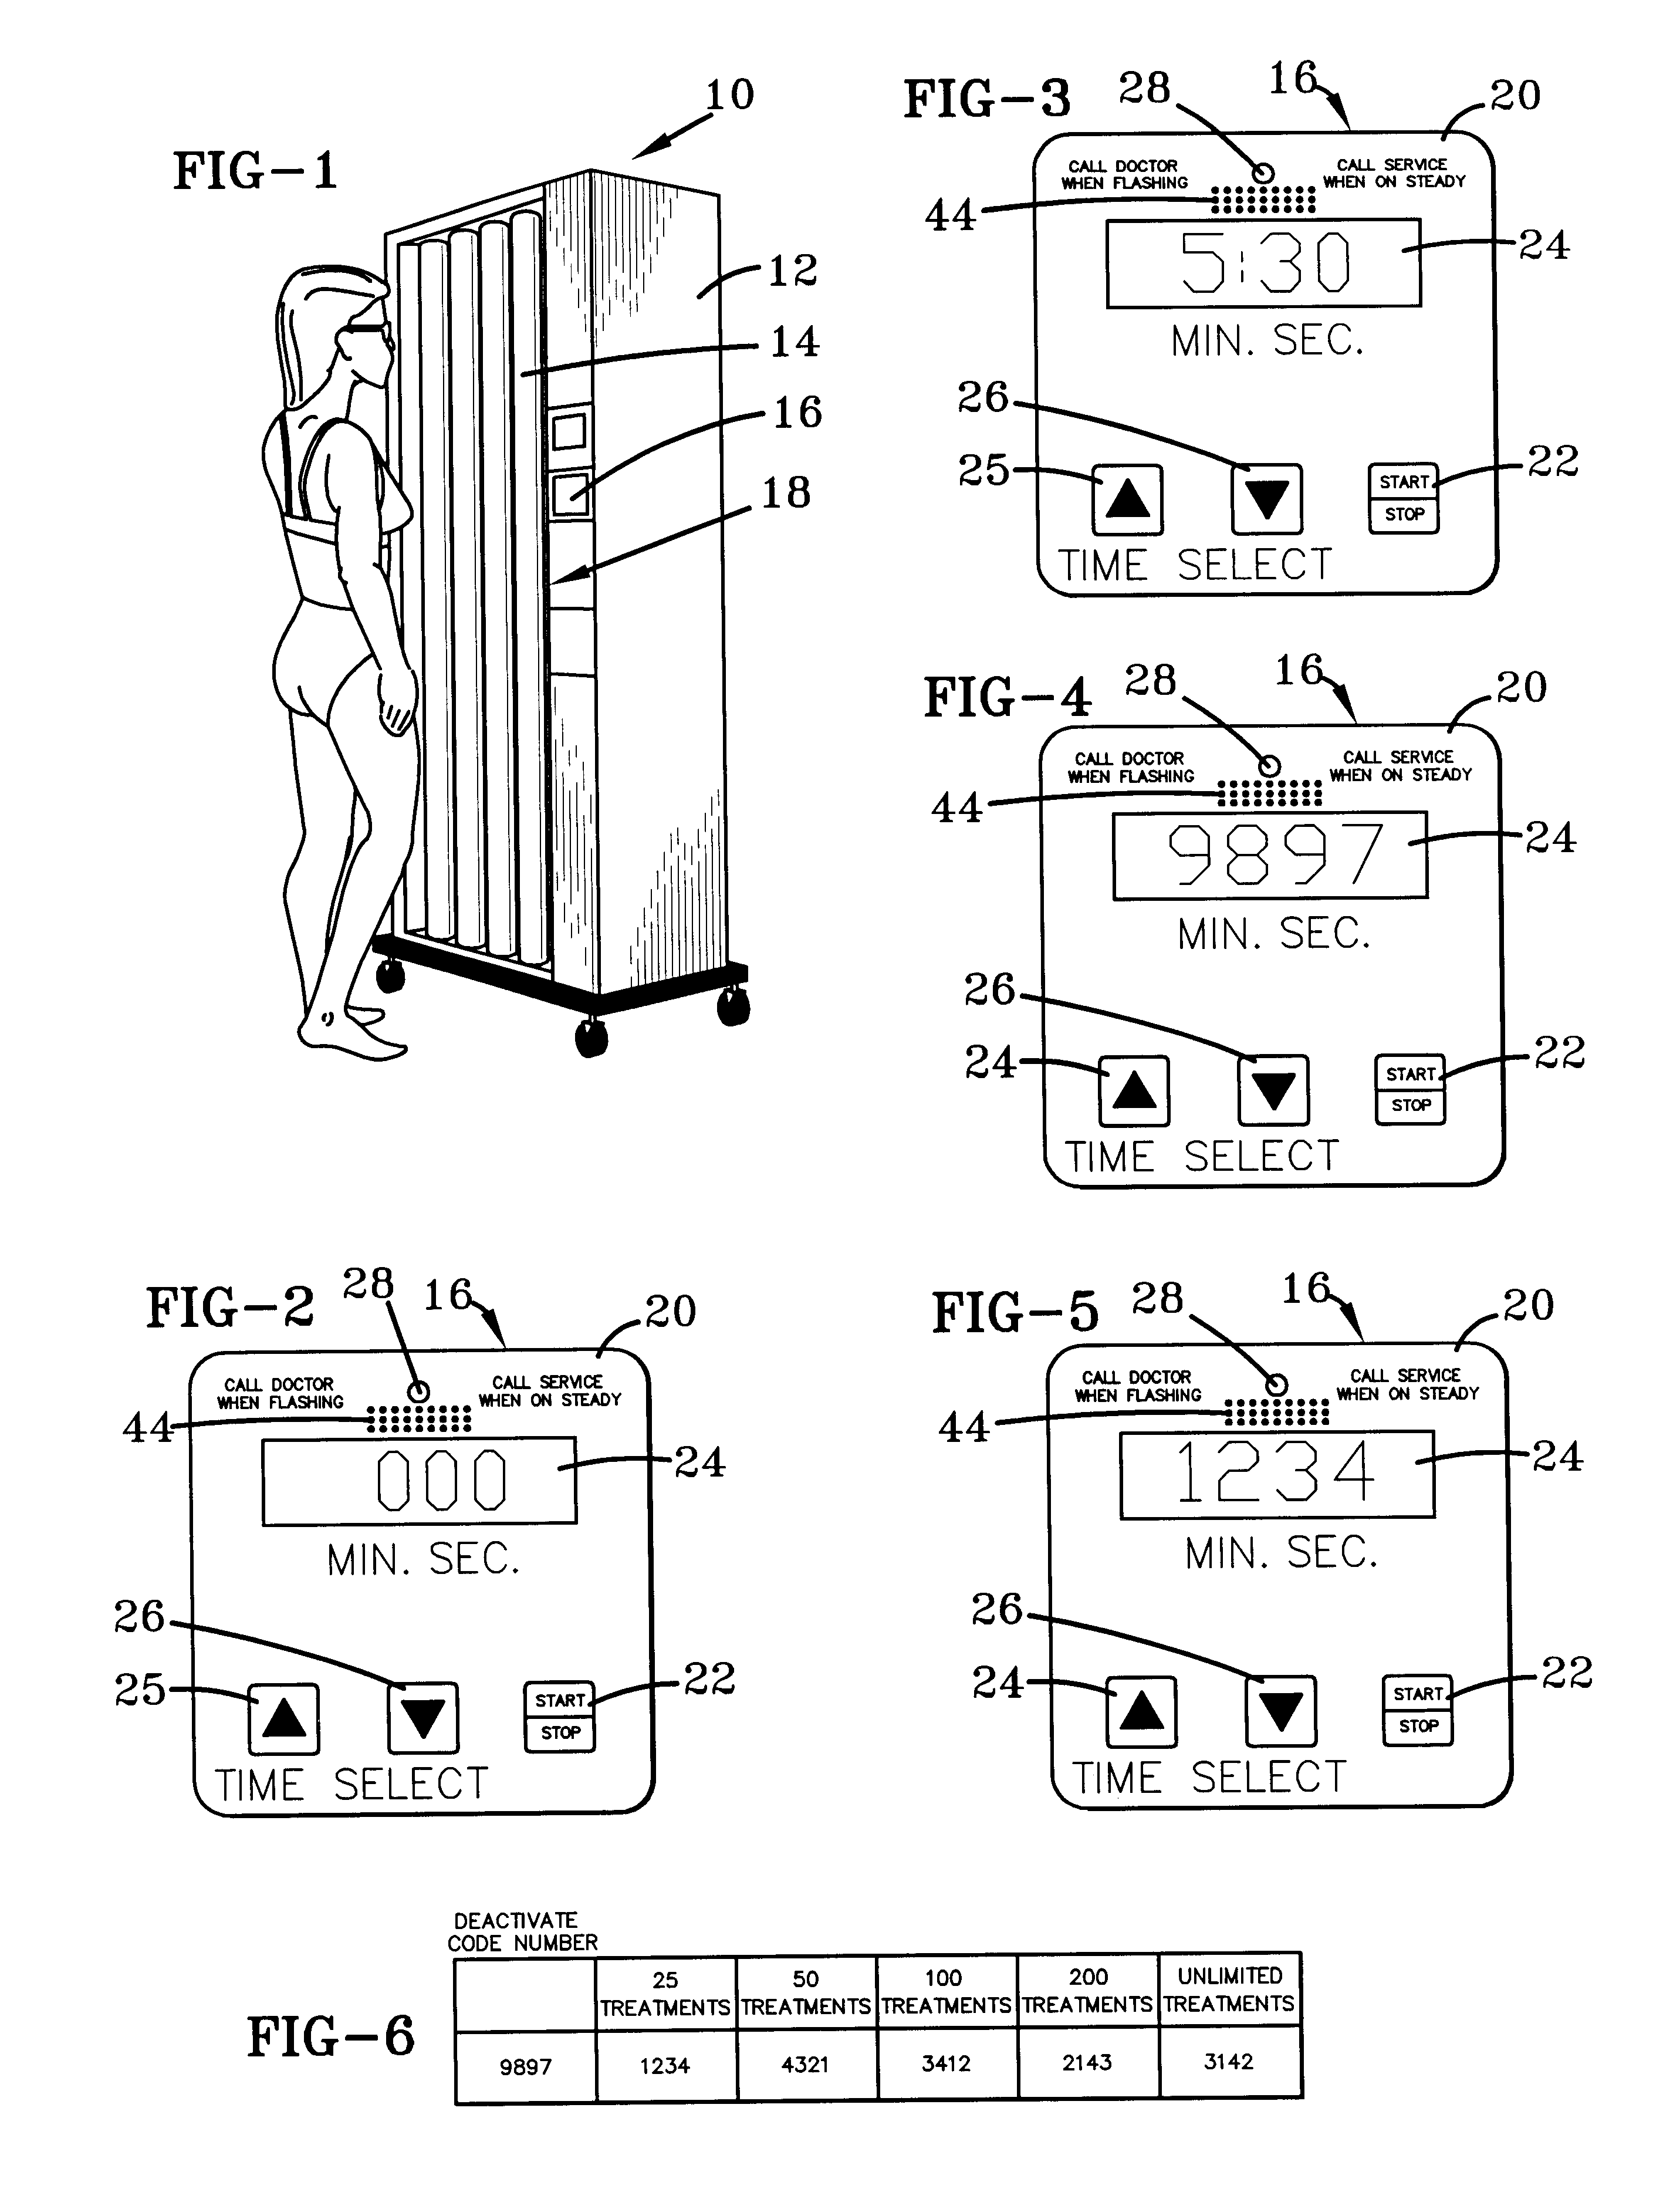 Phototherapeutic device and method